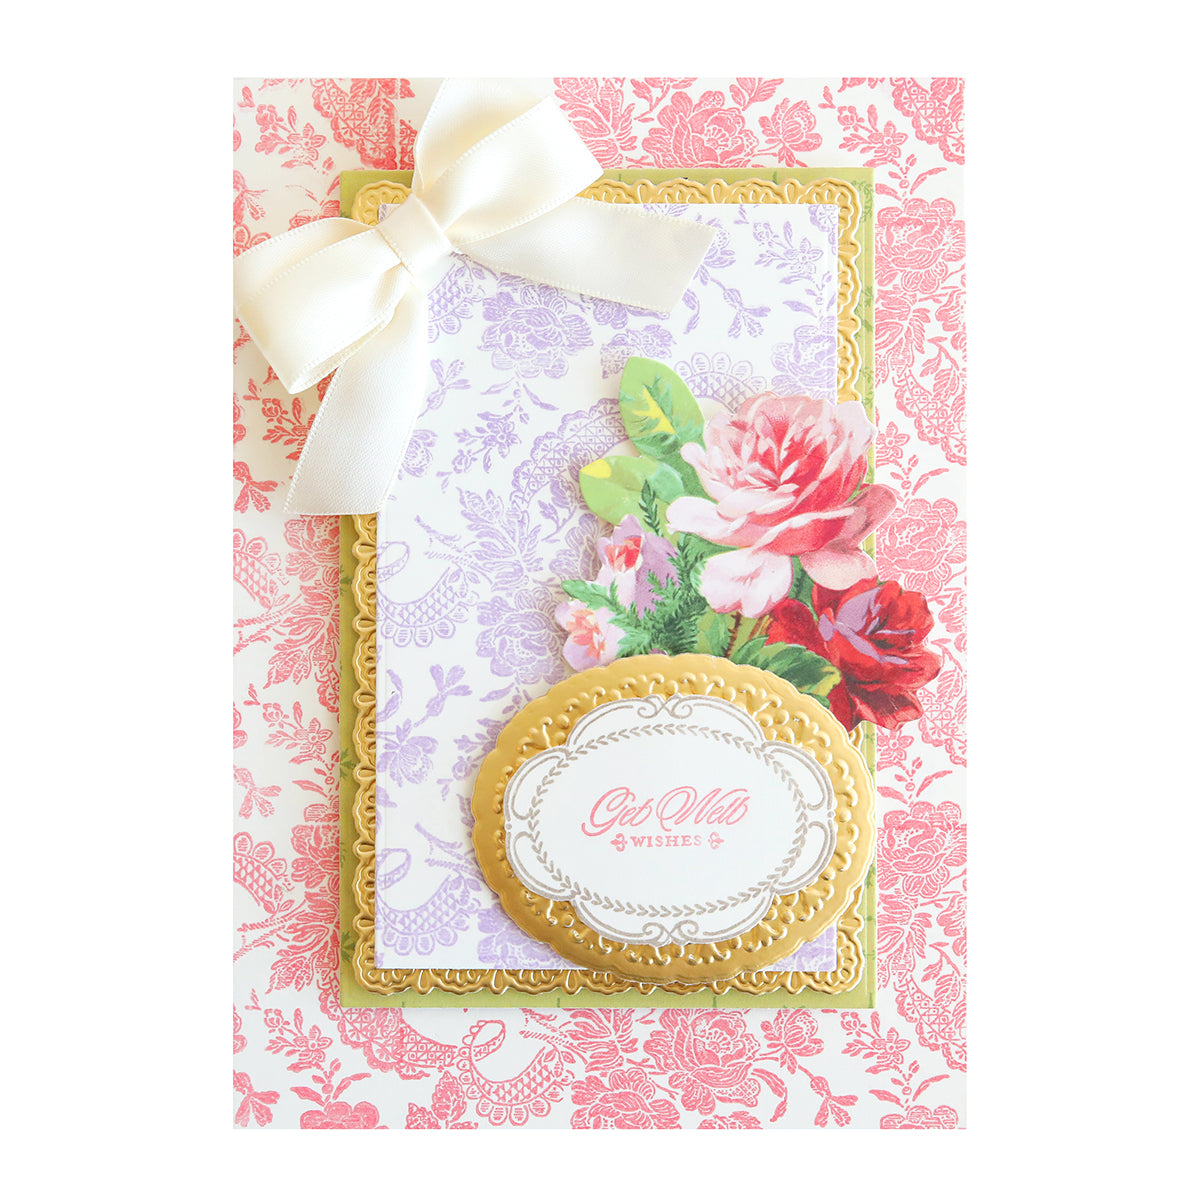 A pink and white Anniversary Stamp Set with a bow and flowers. The set features a border and background adorned with delicate flowers.